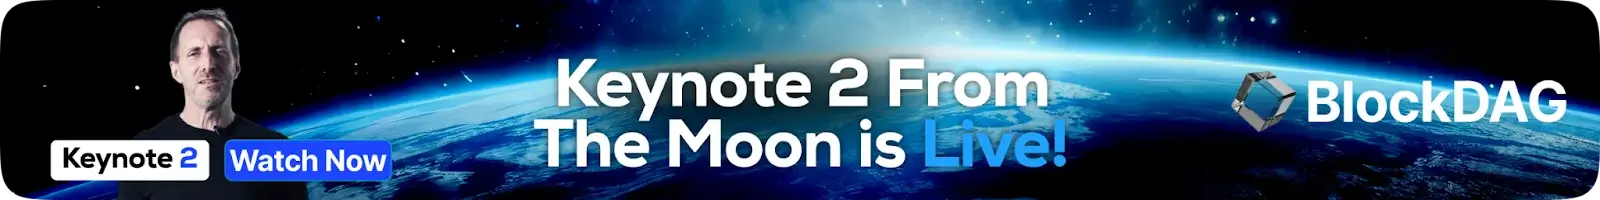 Keynote 2 from the moon is live